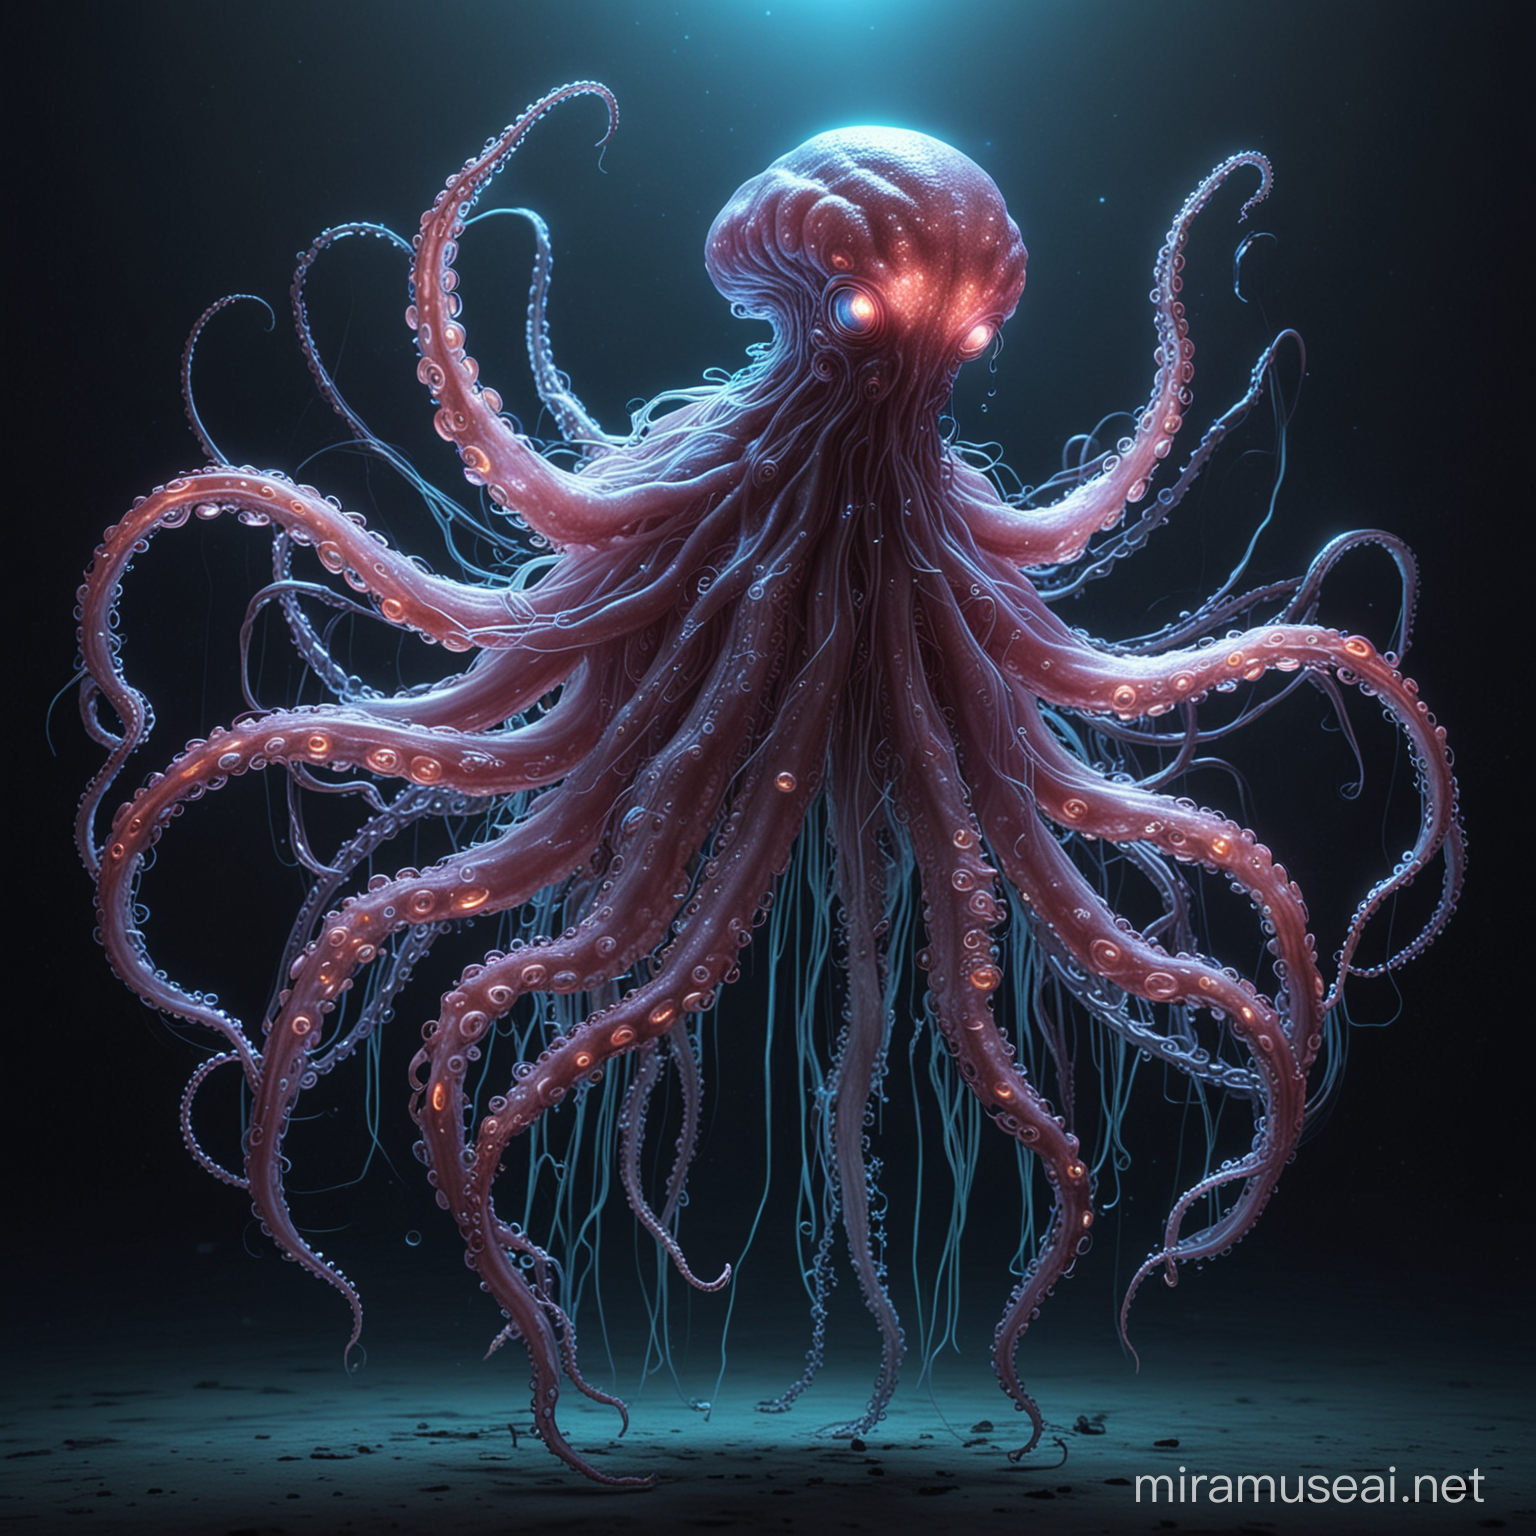 create an alien, who is an amalgamation if octopus and jellyfish with neon lights emitting from its body, highly detailed